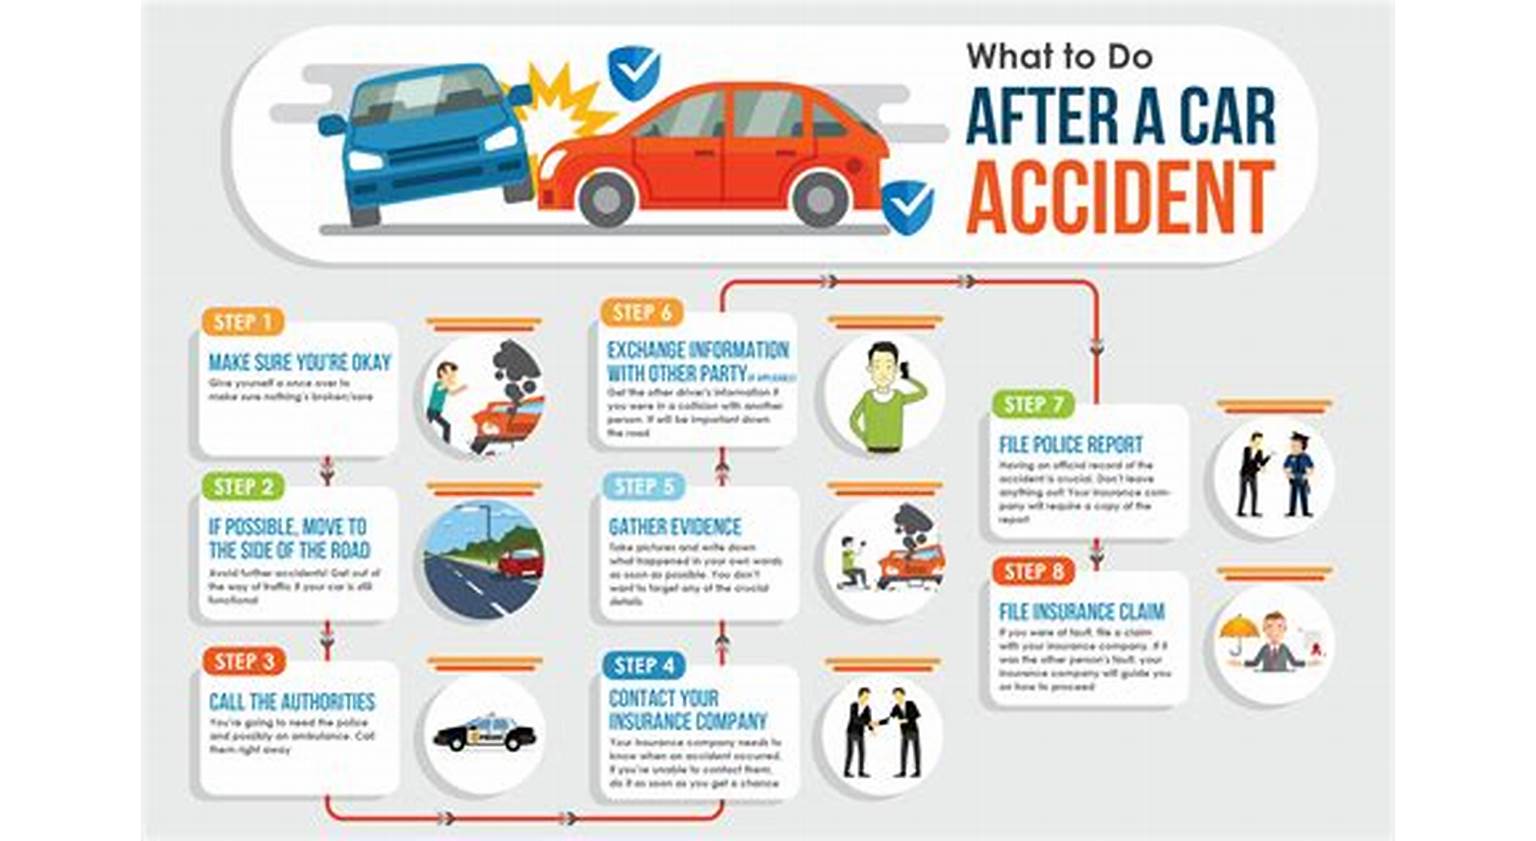 Gathering information after car accident